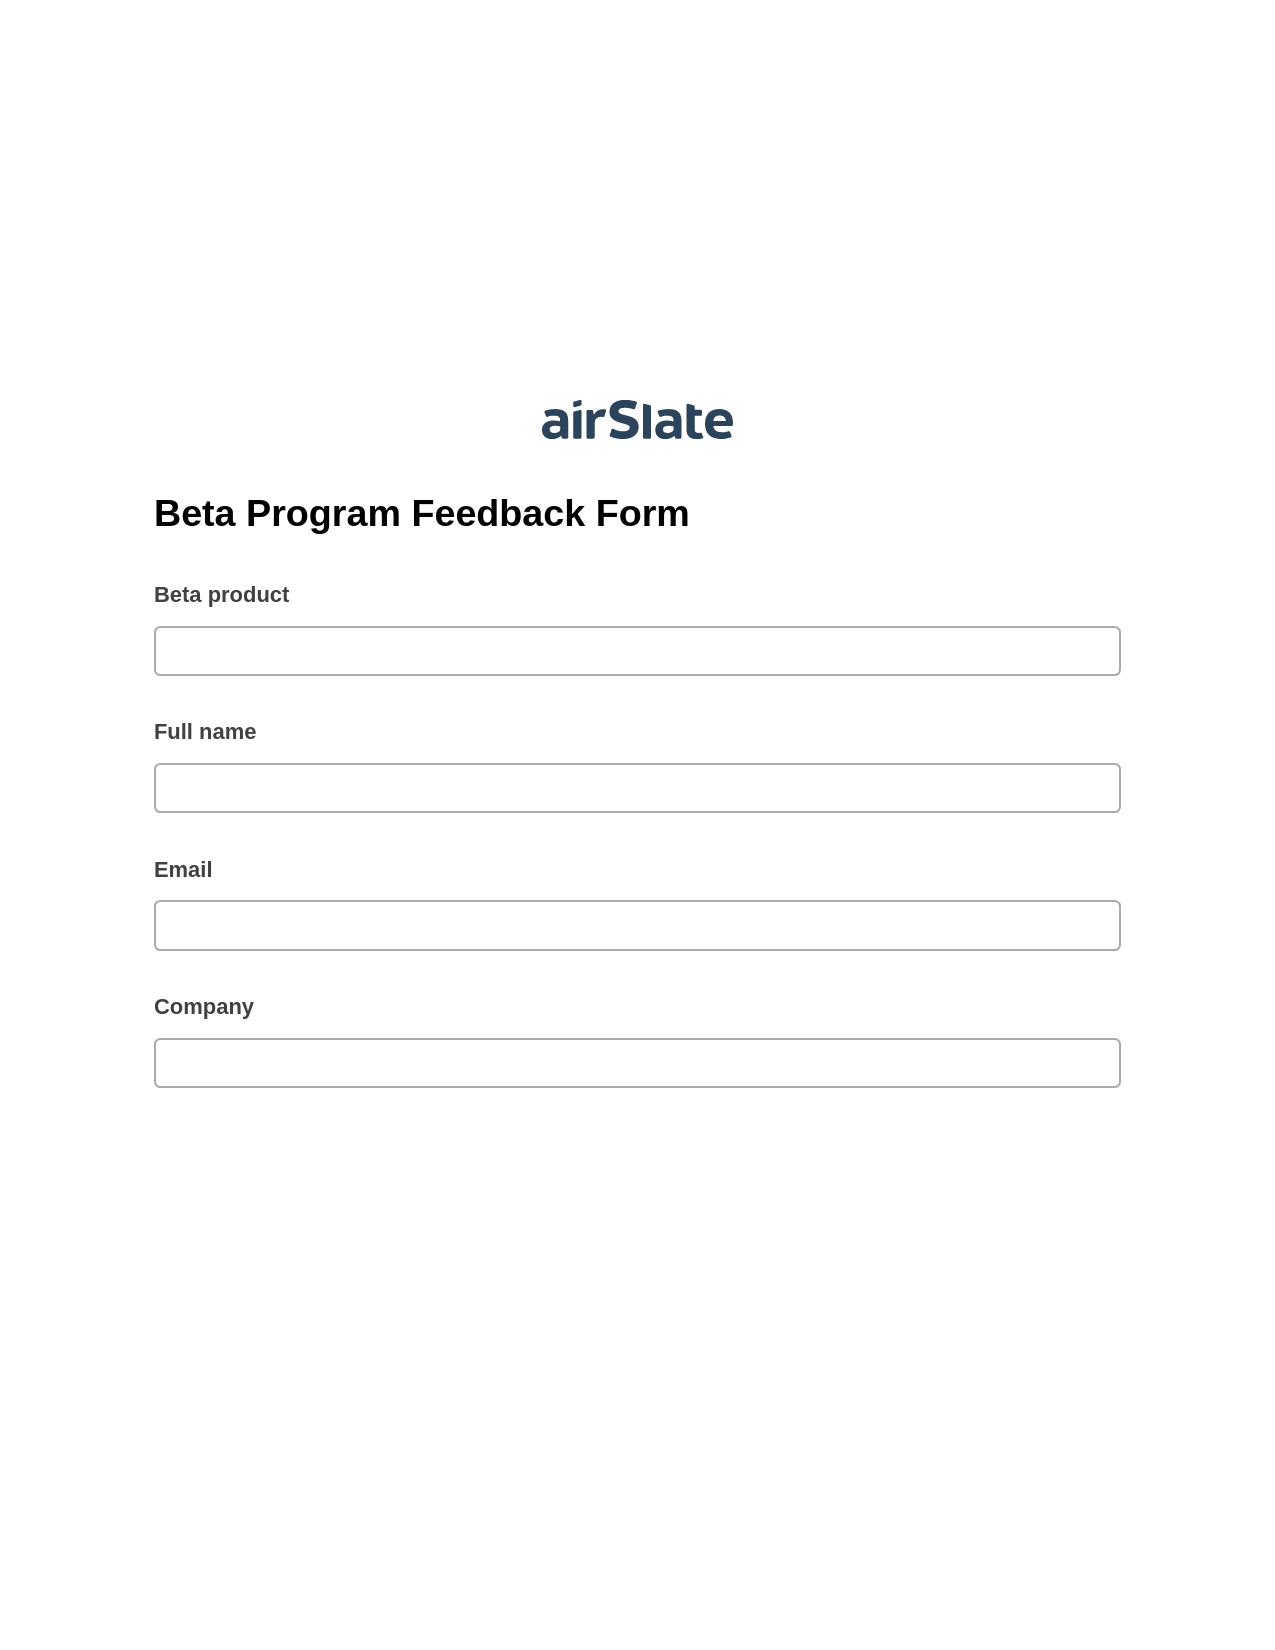 Beta Program Feedback Form Pre-fill from Excel Spreadsheet Bot, Update Salesforce Record Bot, Export to Salesforce Bot